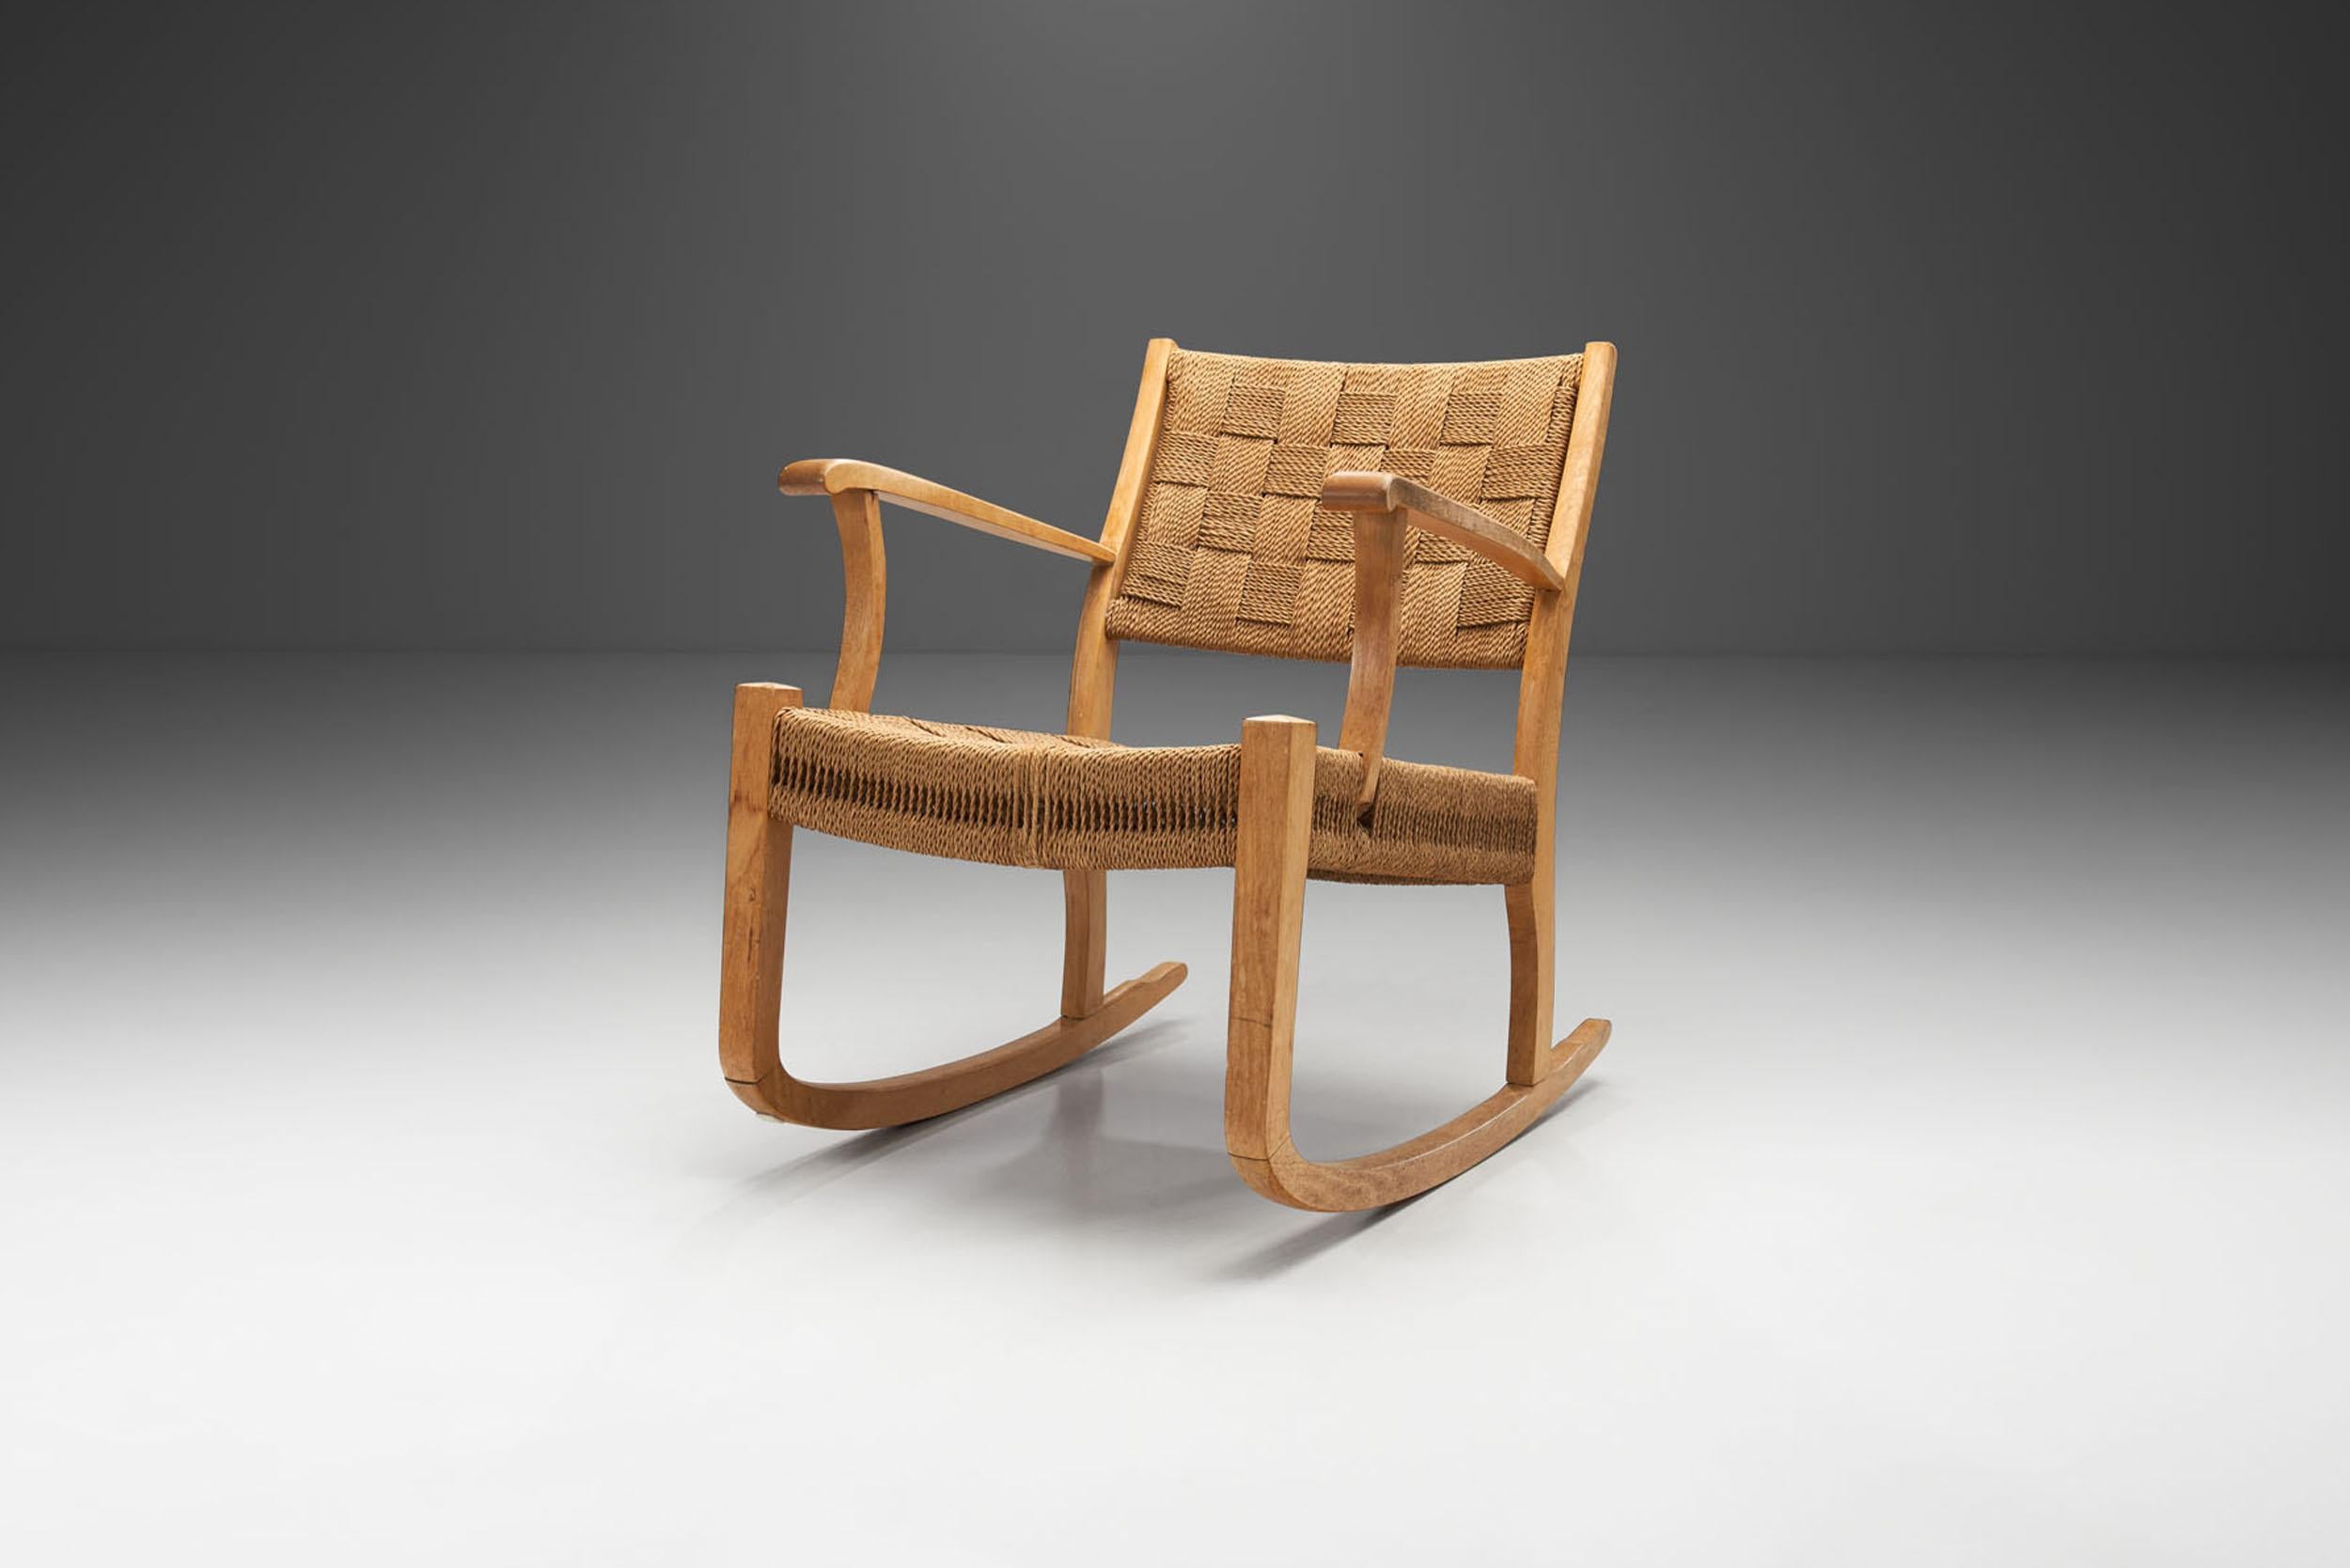 A beech rocking chair, suspended in seat and back with woven paper cord. Twisted paper cord woven across an open wood frame has been used to form the seats of Danish chairs since the 1940s but through the 1950s and 1960s paper cord became perhaps